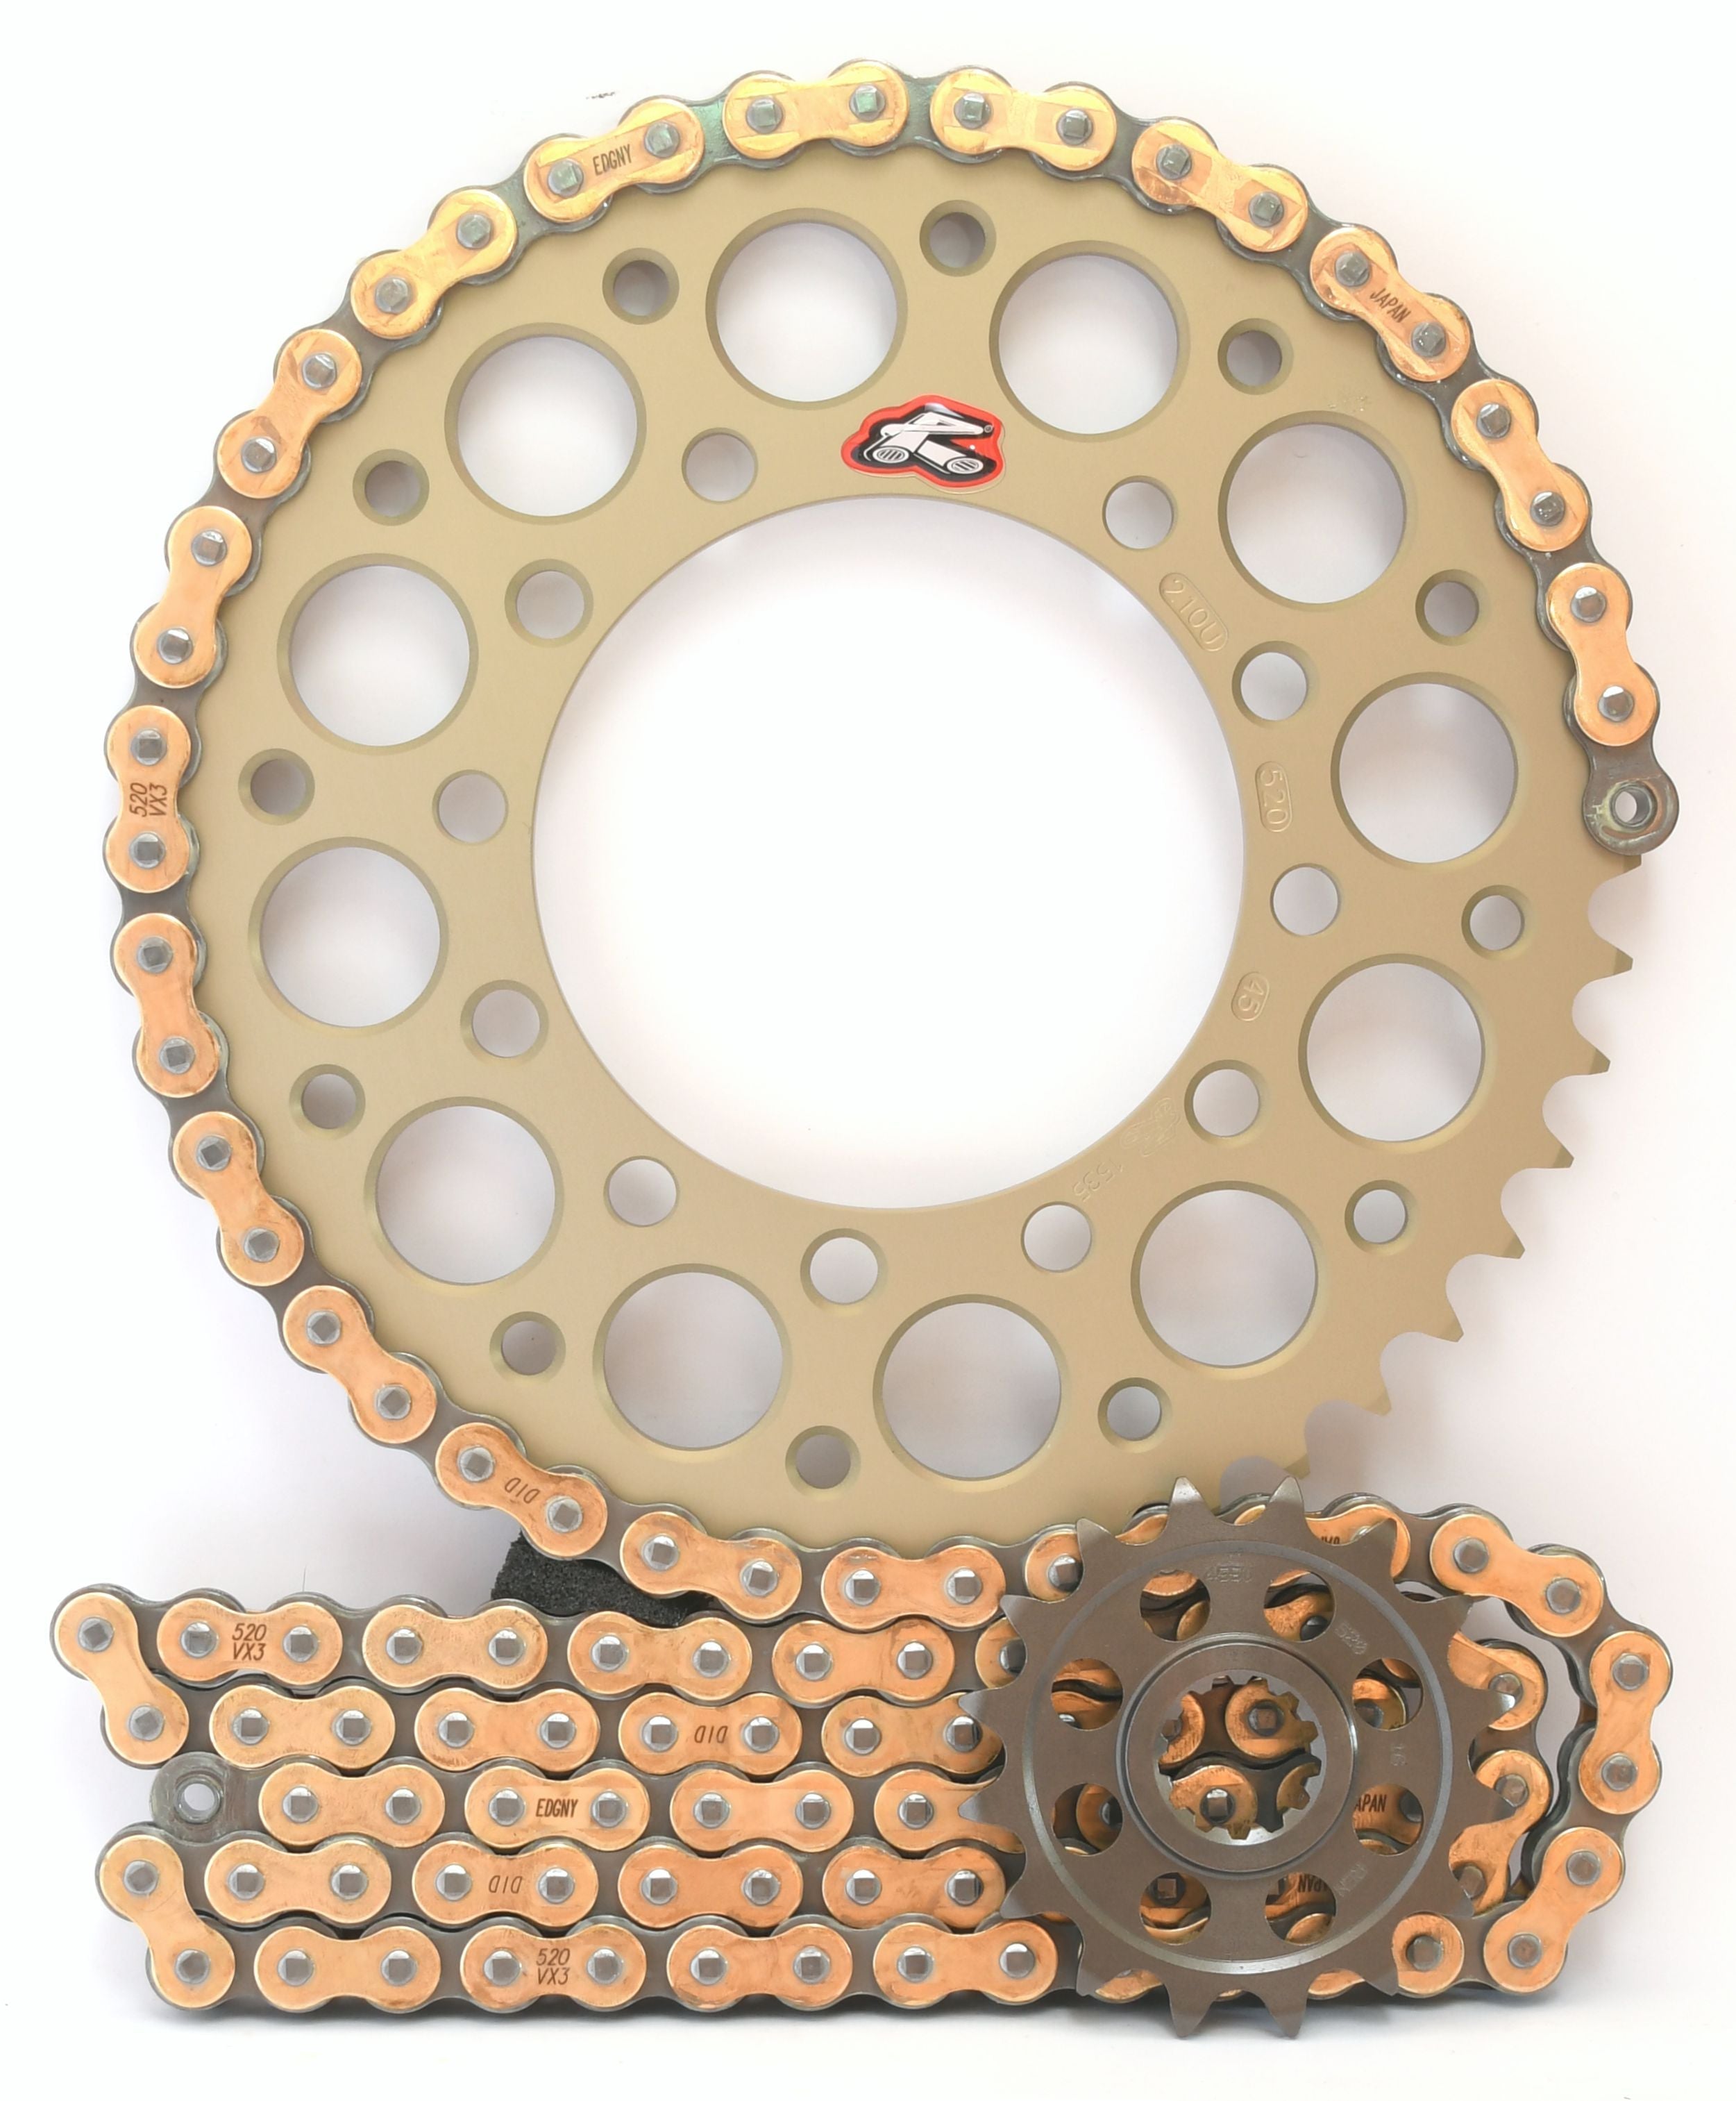 Renthal Ultralight and DID Chain & Sprocket Kit for Ducati Panigale 899 and 959 - Choose Your Gearing